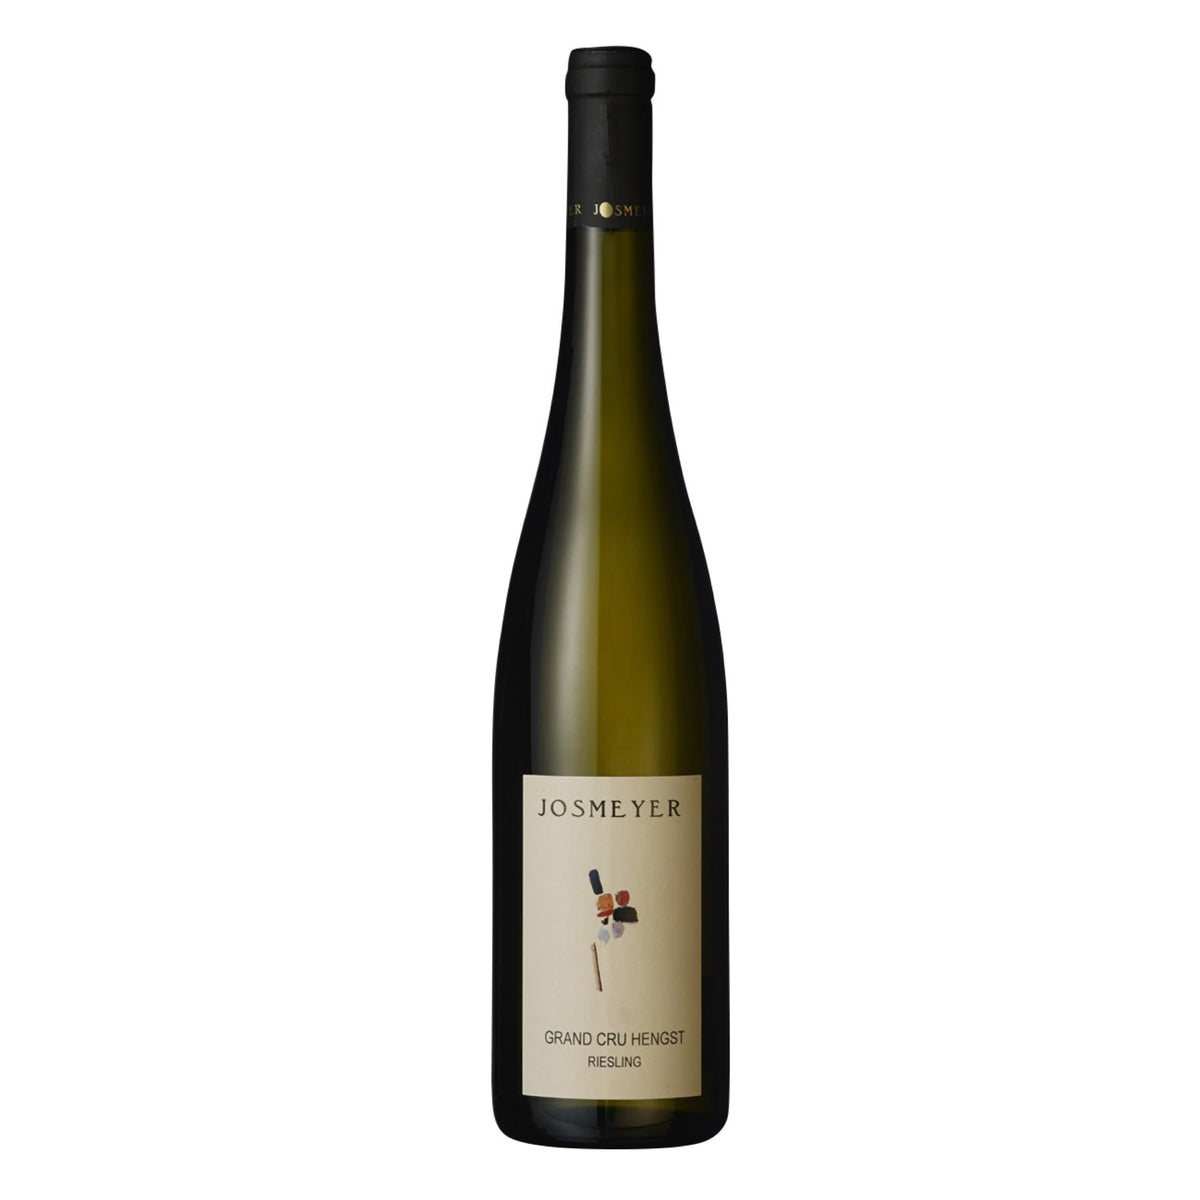 Domaine JOSMEYER Riesling Grand Cru &quot;Hengst&quot; 2008